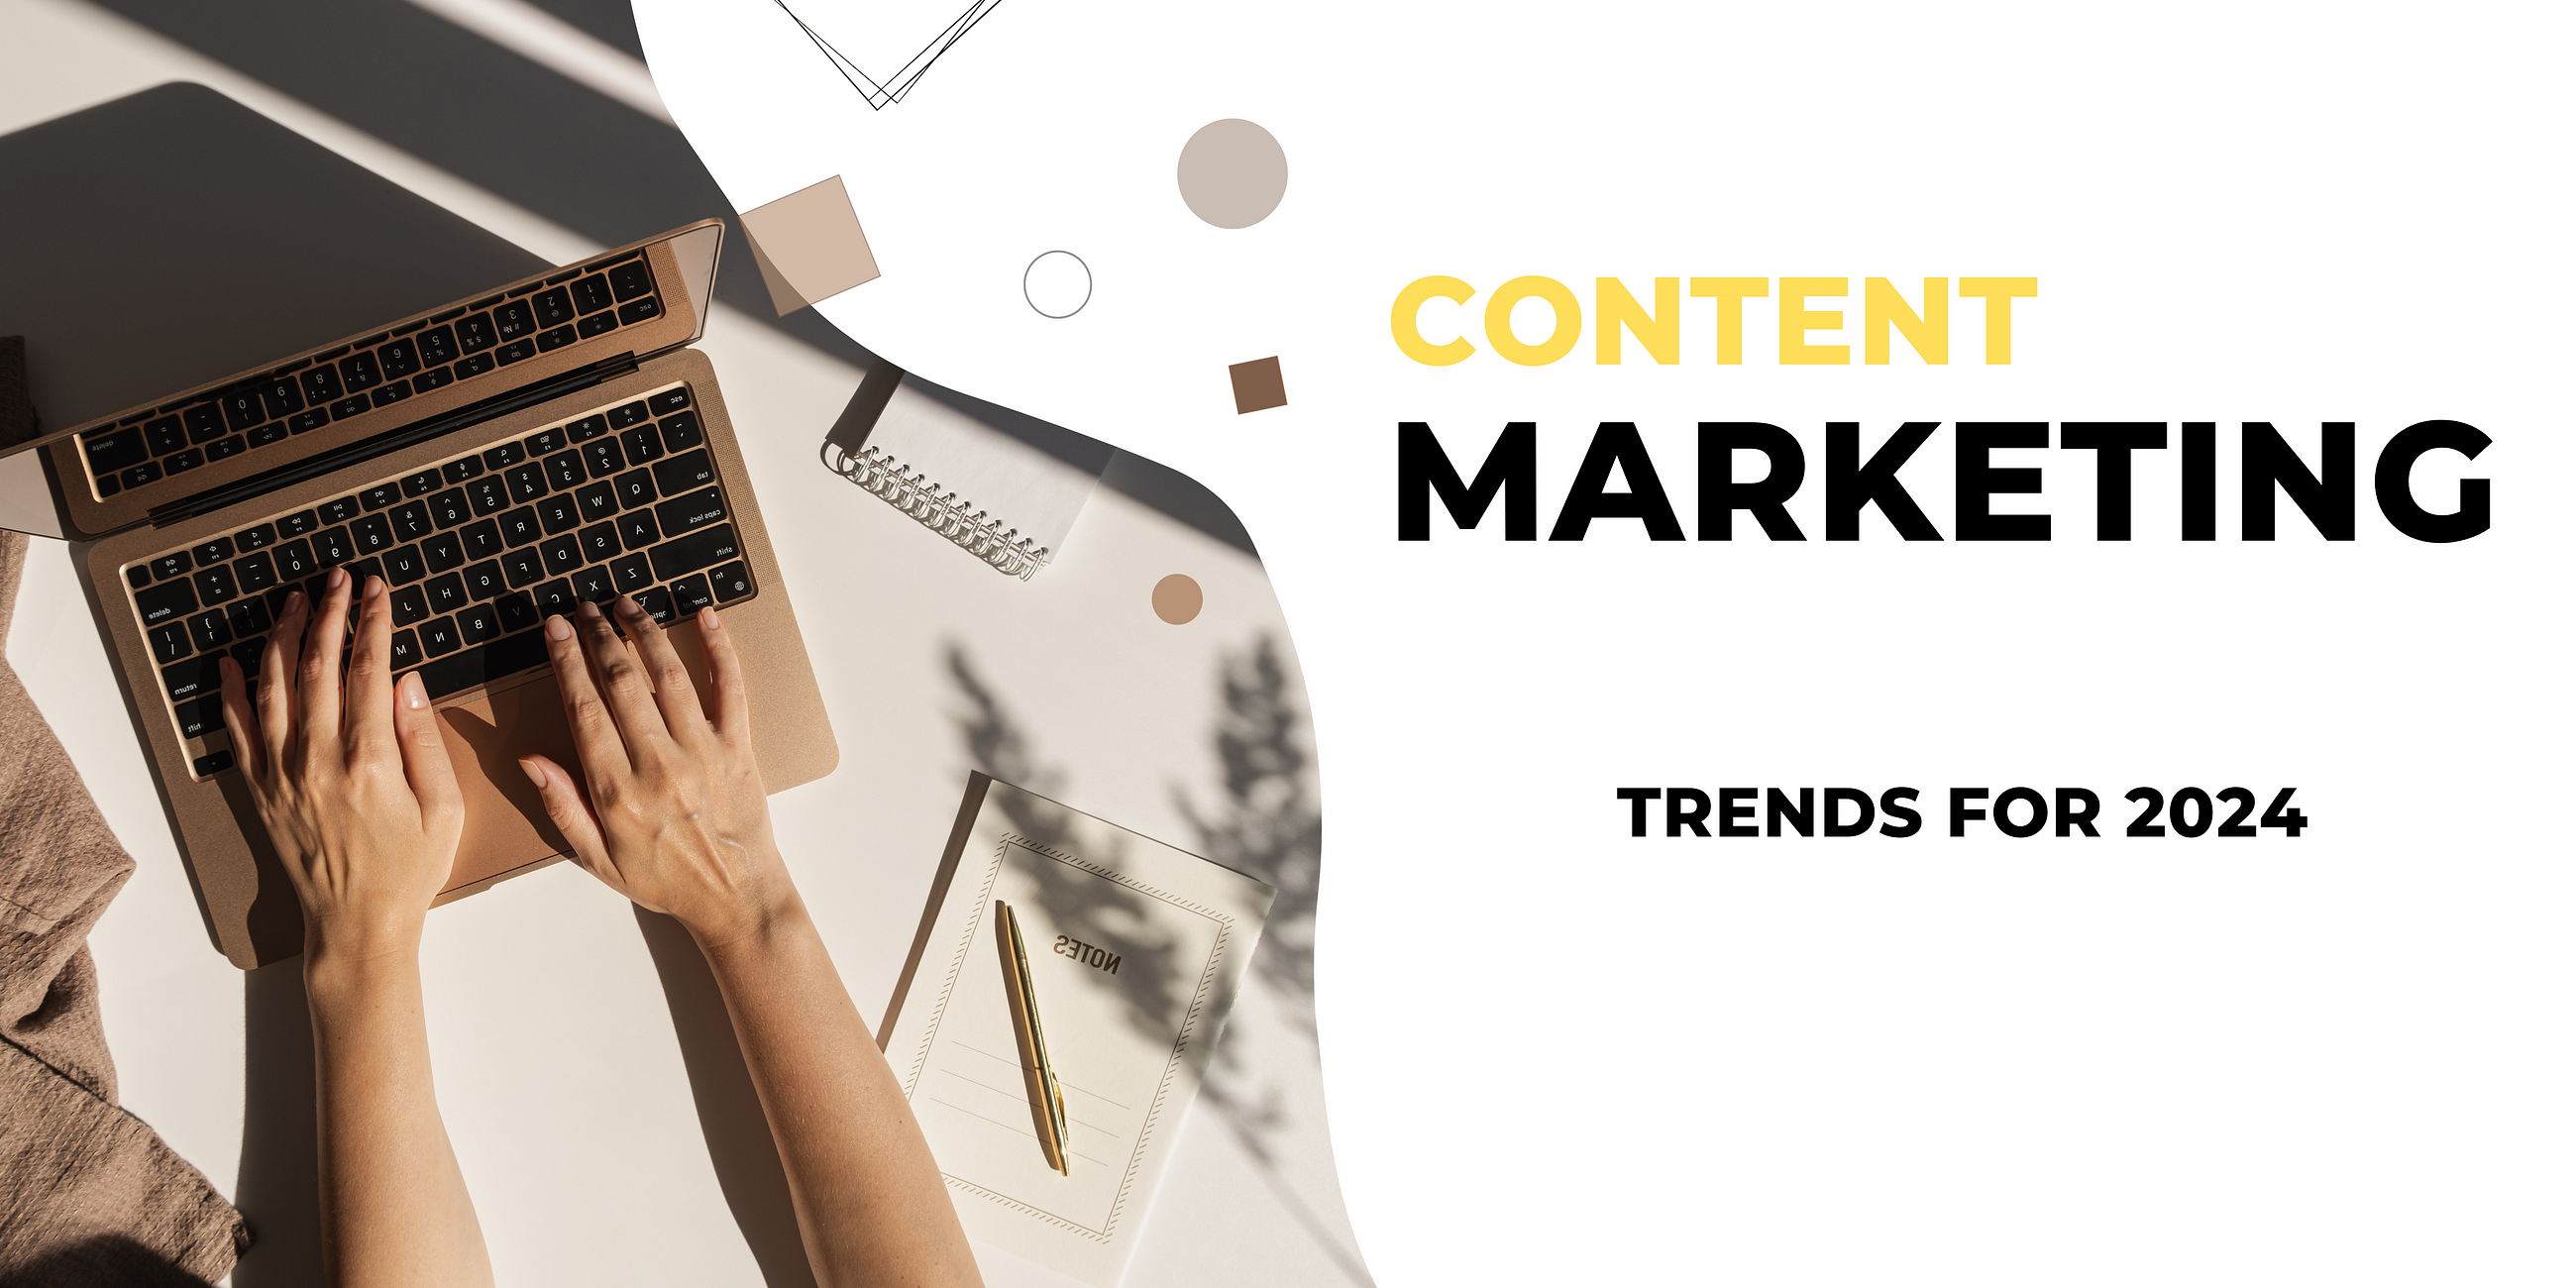 Content Marketing Trends for 2024